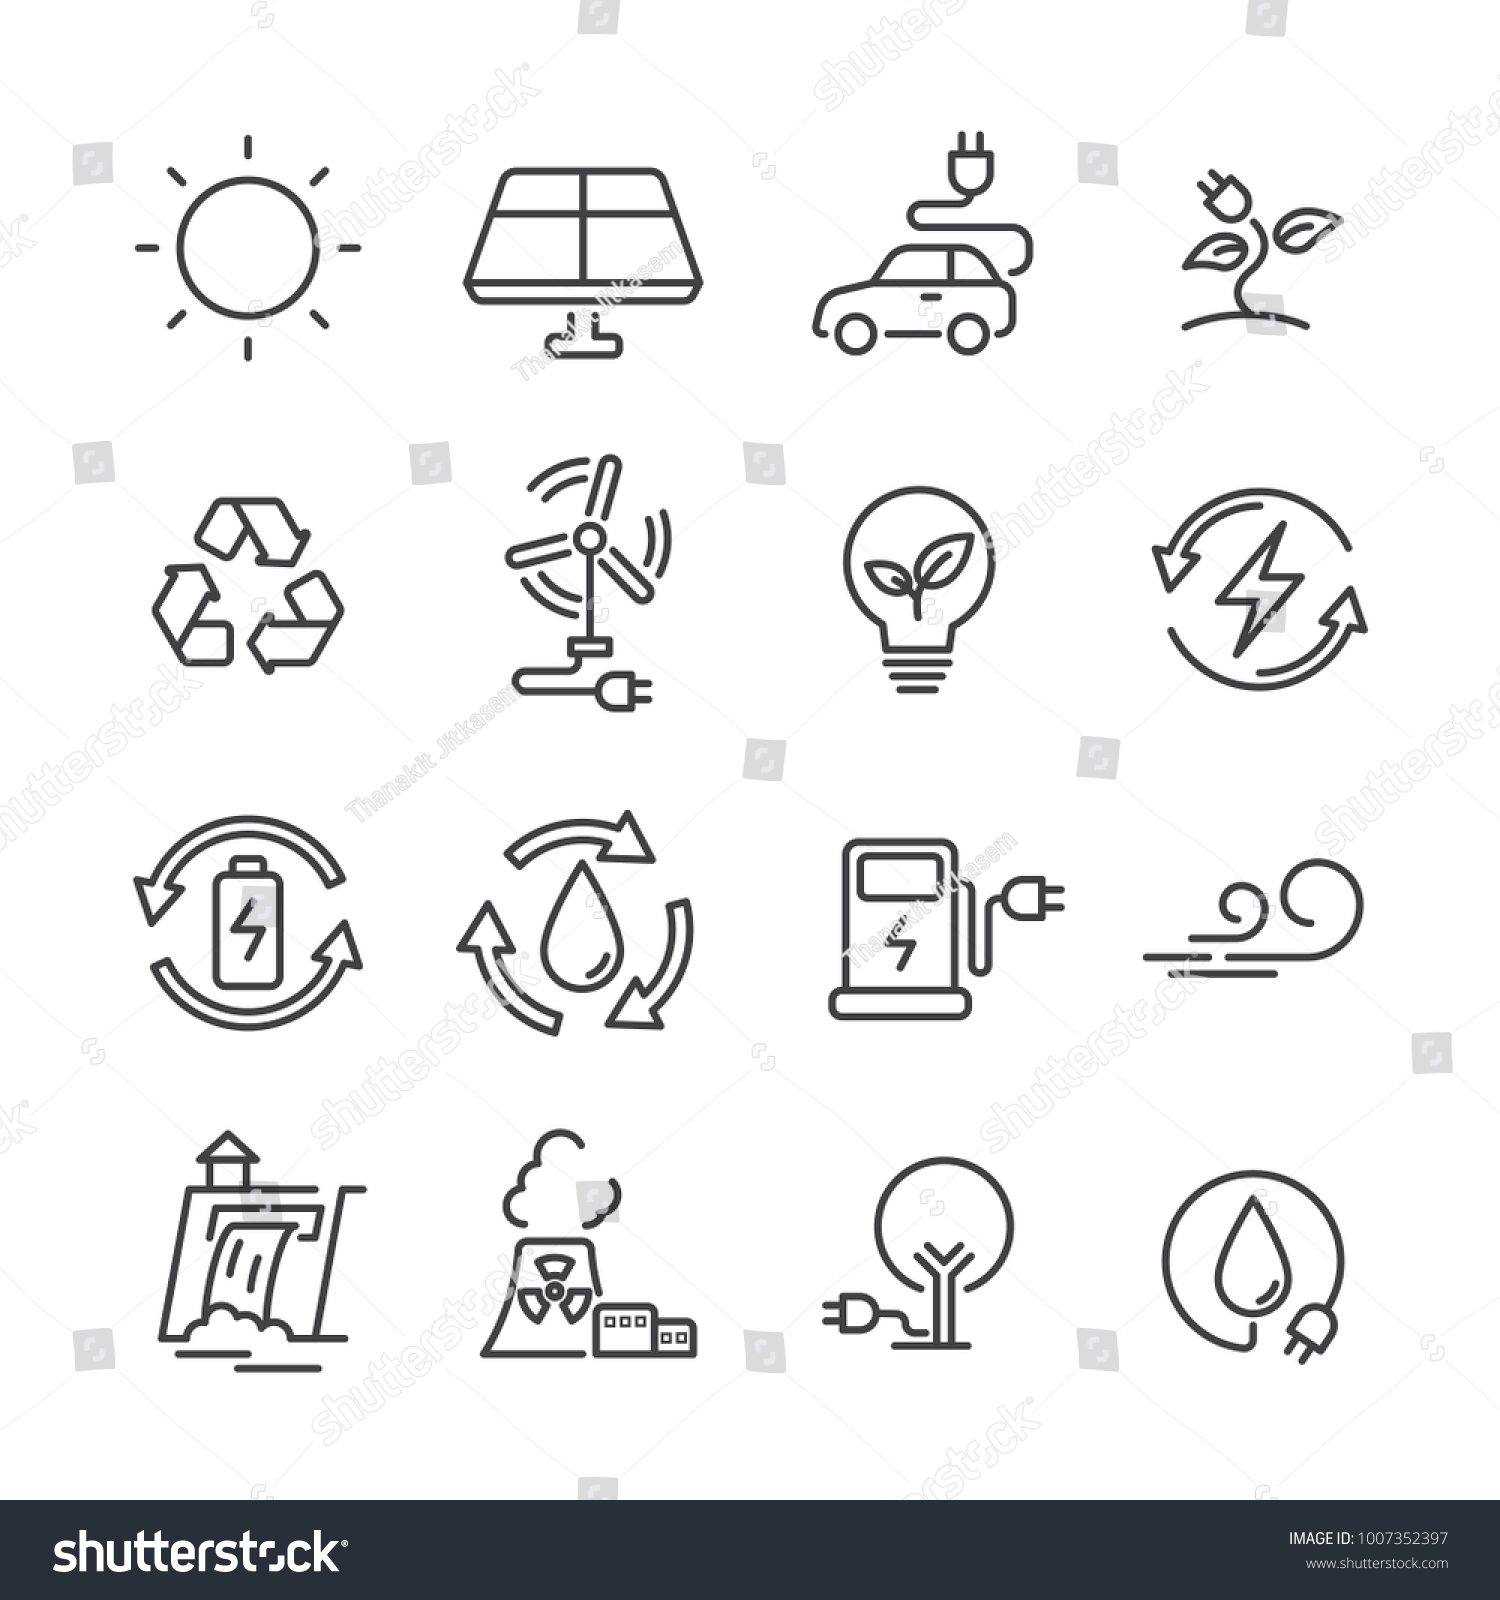 line icon electric power clean ennergy concept. editable stroke. vector illutration.  #1007352397